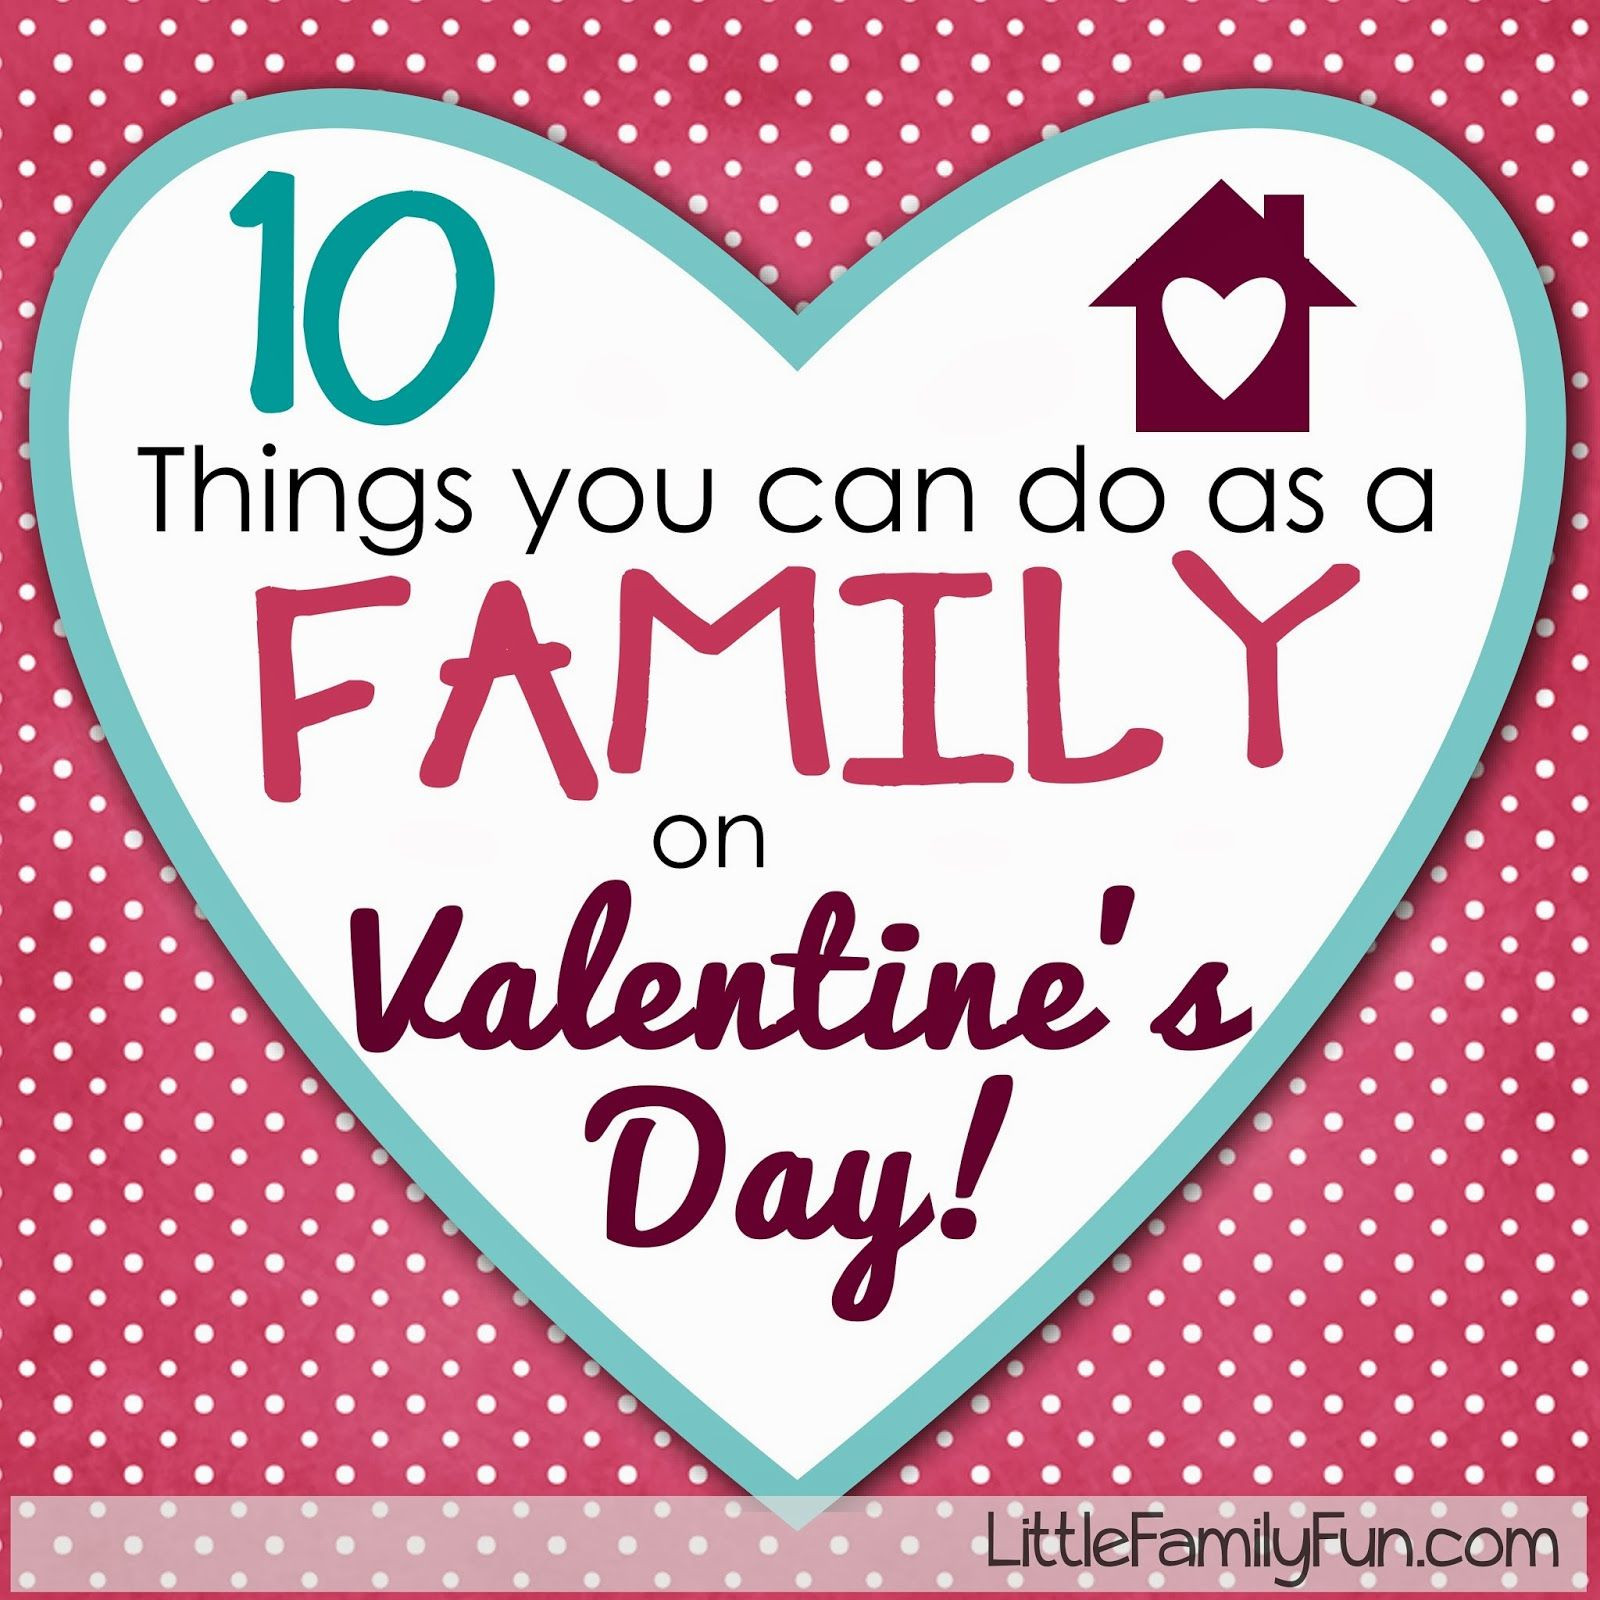 Fun Valentines Day Ideas
 10 fun & easy Family Activities for Valentines Day Check